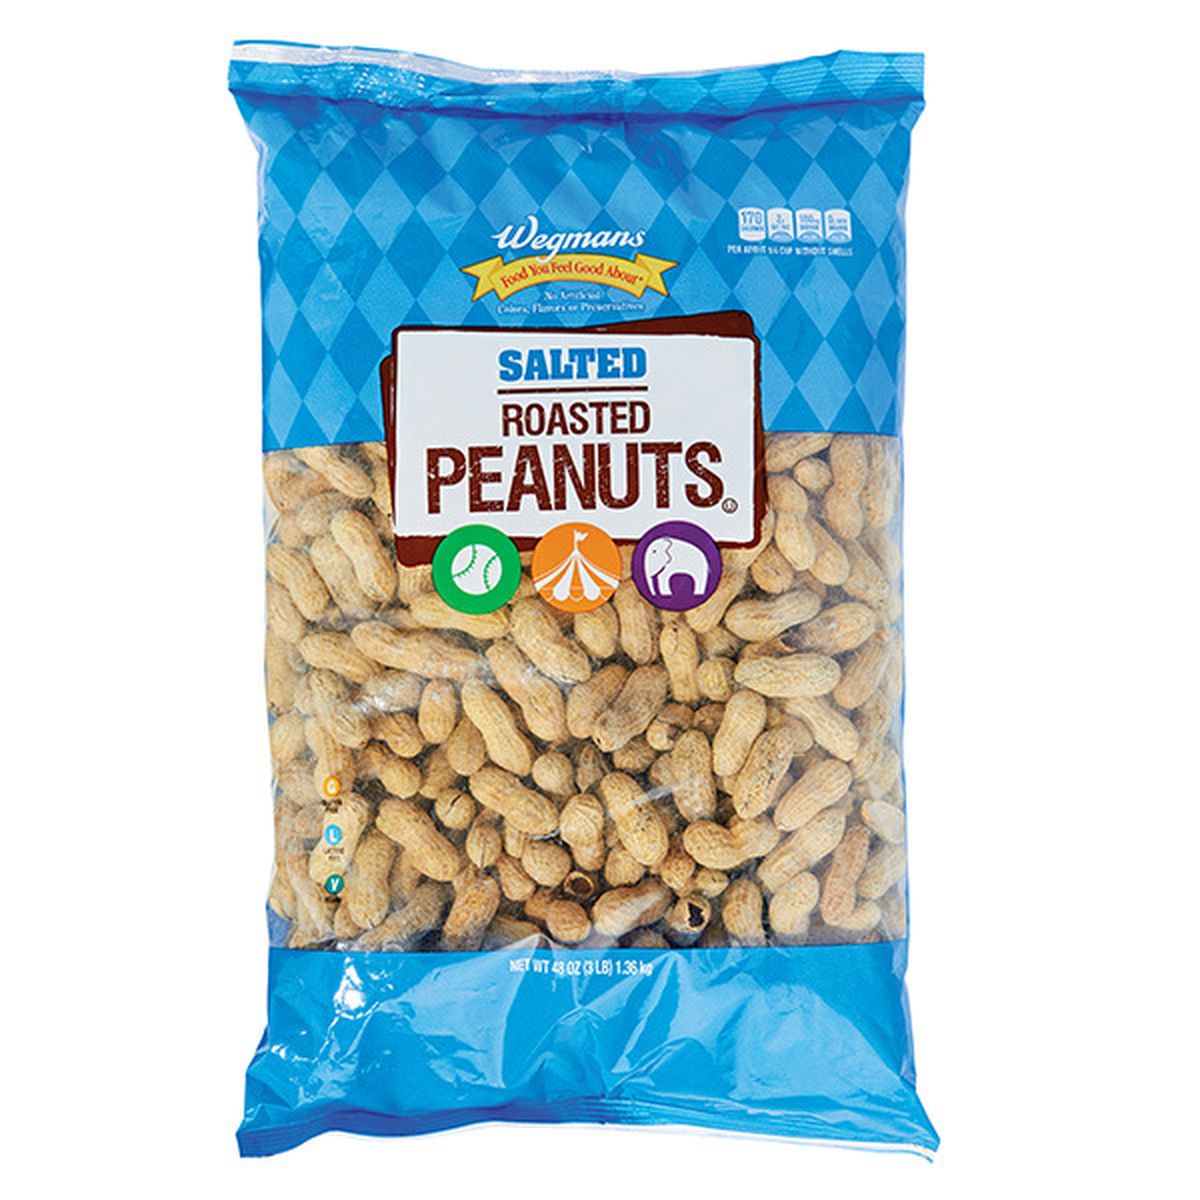 Calories in Wegmans Salted Roasted Peanuts